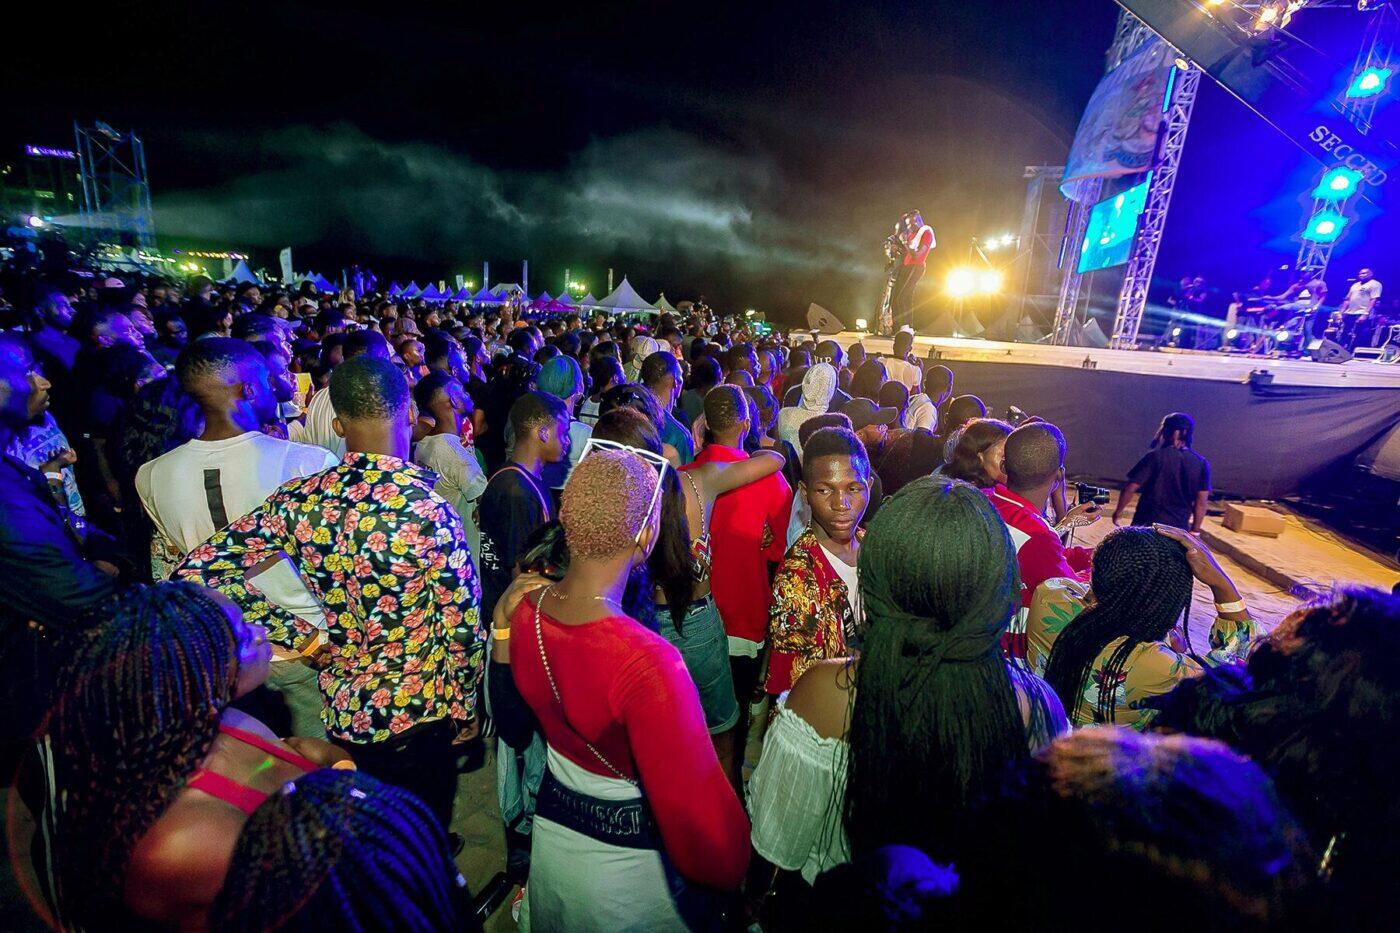 Experience These 12 Festivals in Nigeria